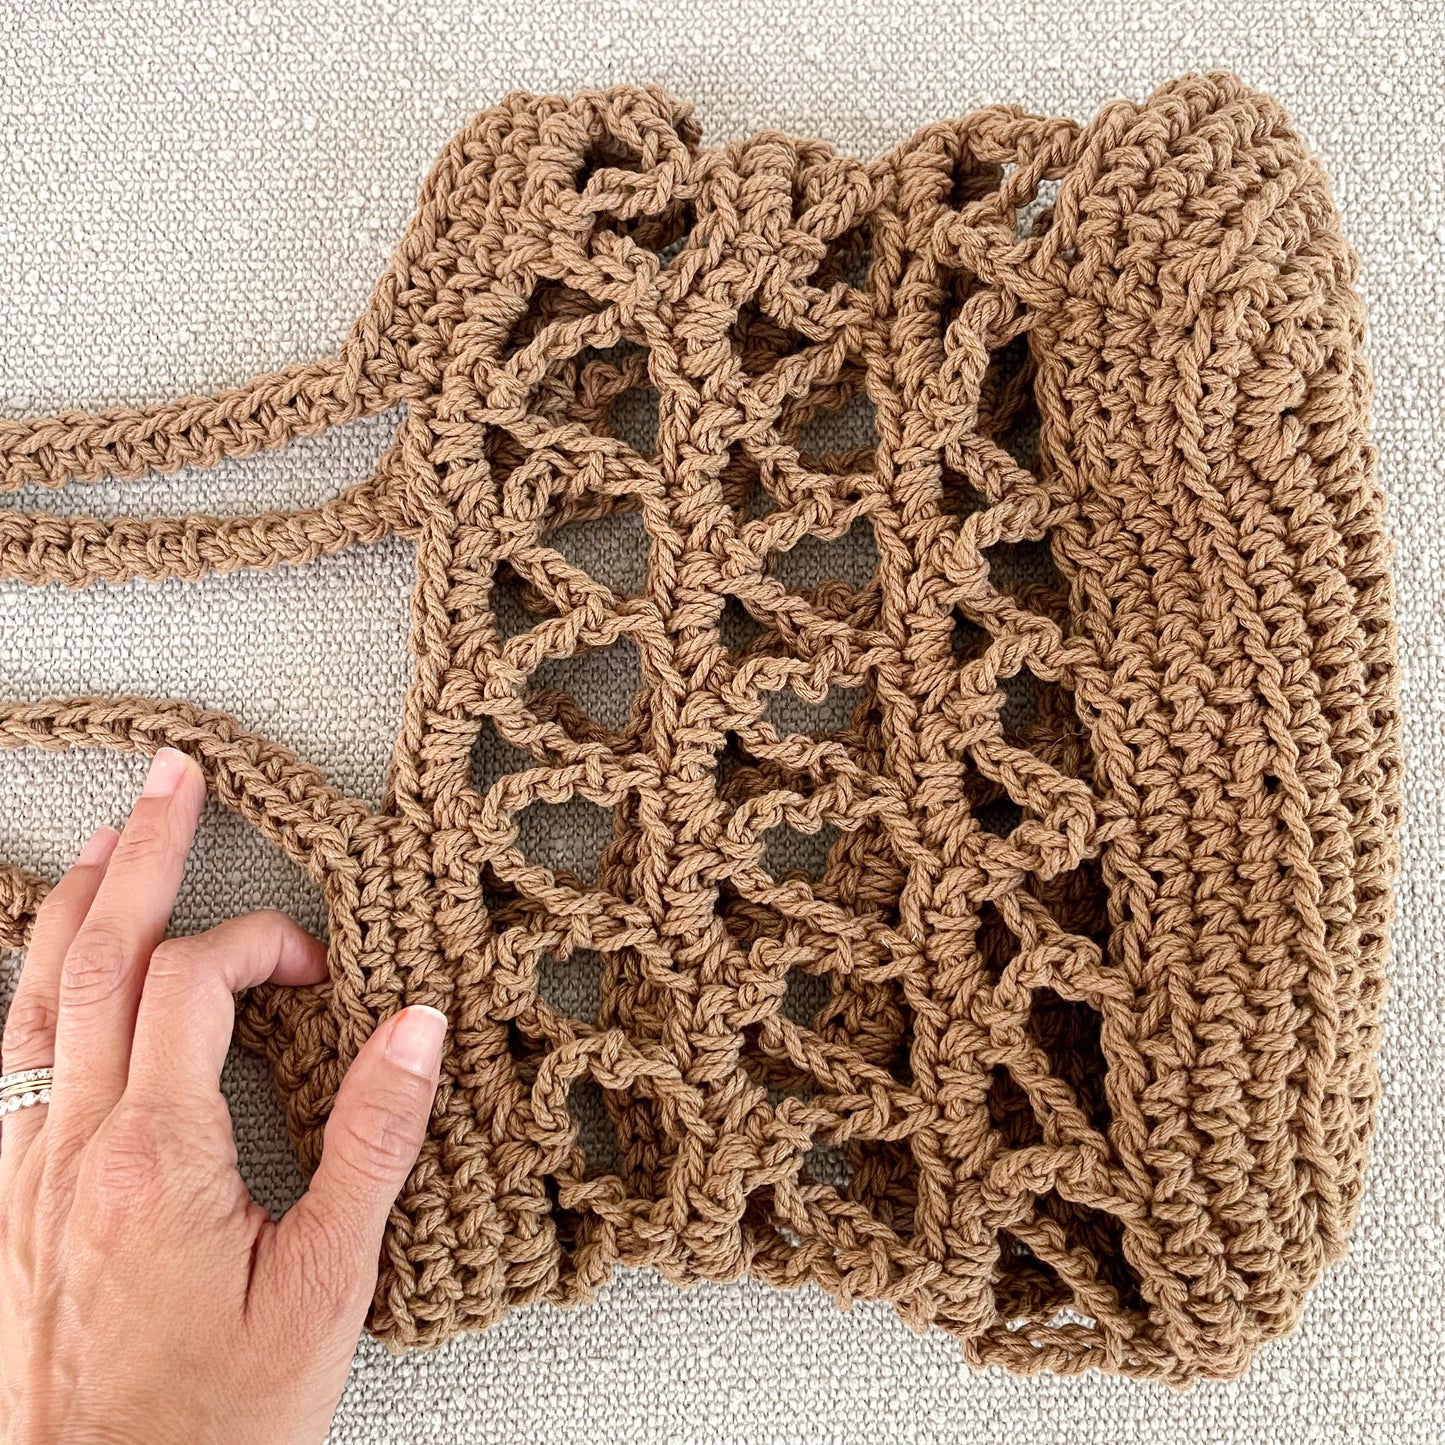 Picture of a crochet mesh handbag in brown with a closeup of the mesh design. A great addition to any neutral wardrobe. Measures 10" wide x 9" tall + a shoulder strap. Made of 100% cotton in brown.